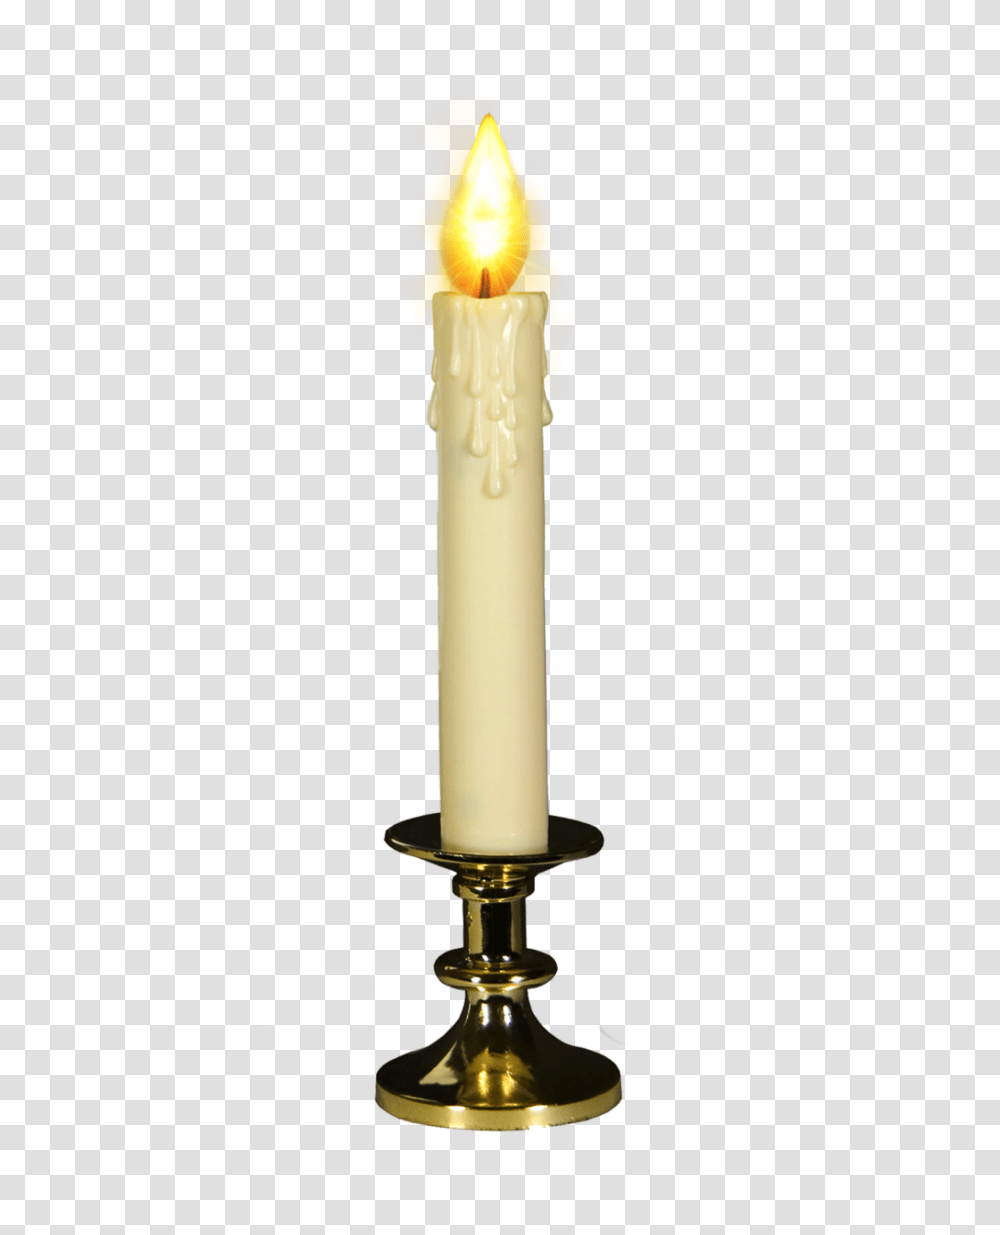 Melting Candle Clipart Candel, Lamp, Fire, Light, Flame Transparent Png